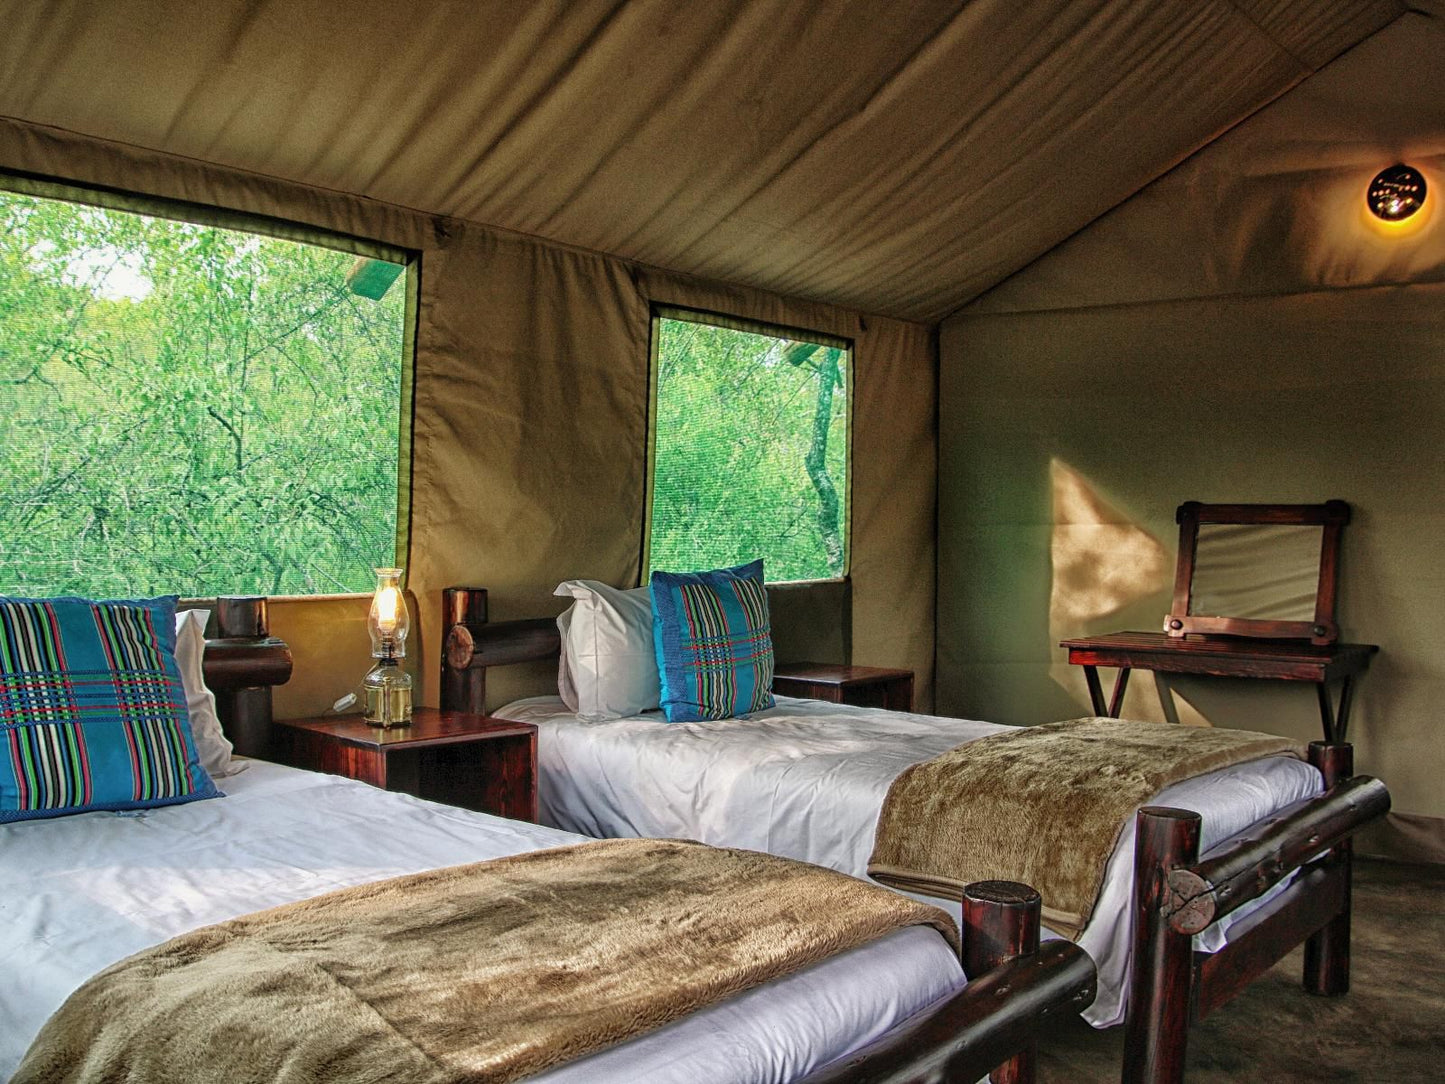 Awelani Lodge Mutale Limpopo Province South Africa Tent, Architecture, Bedroom